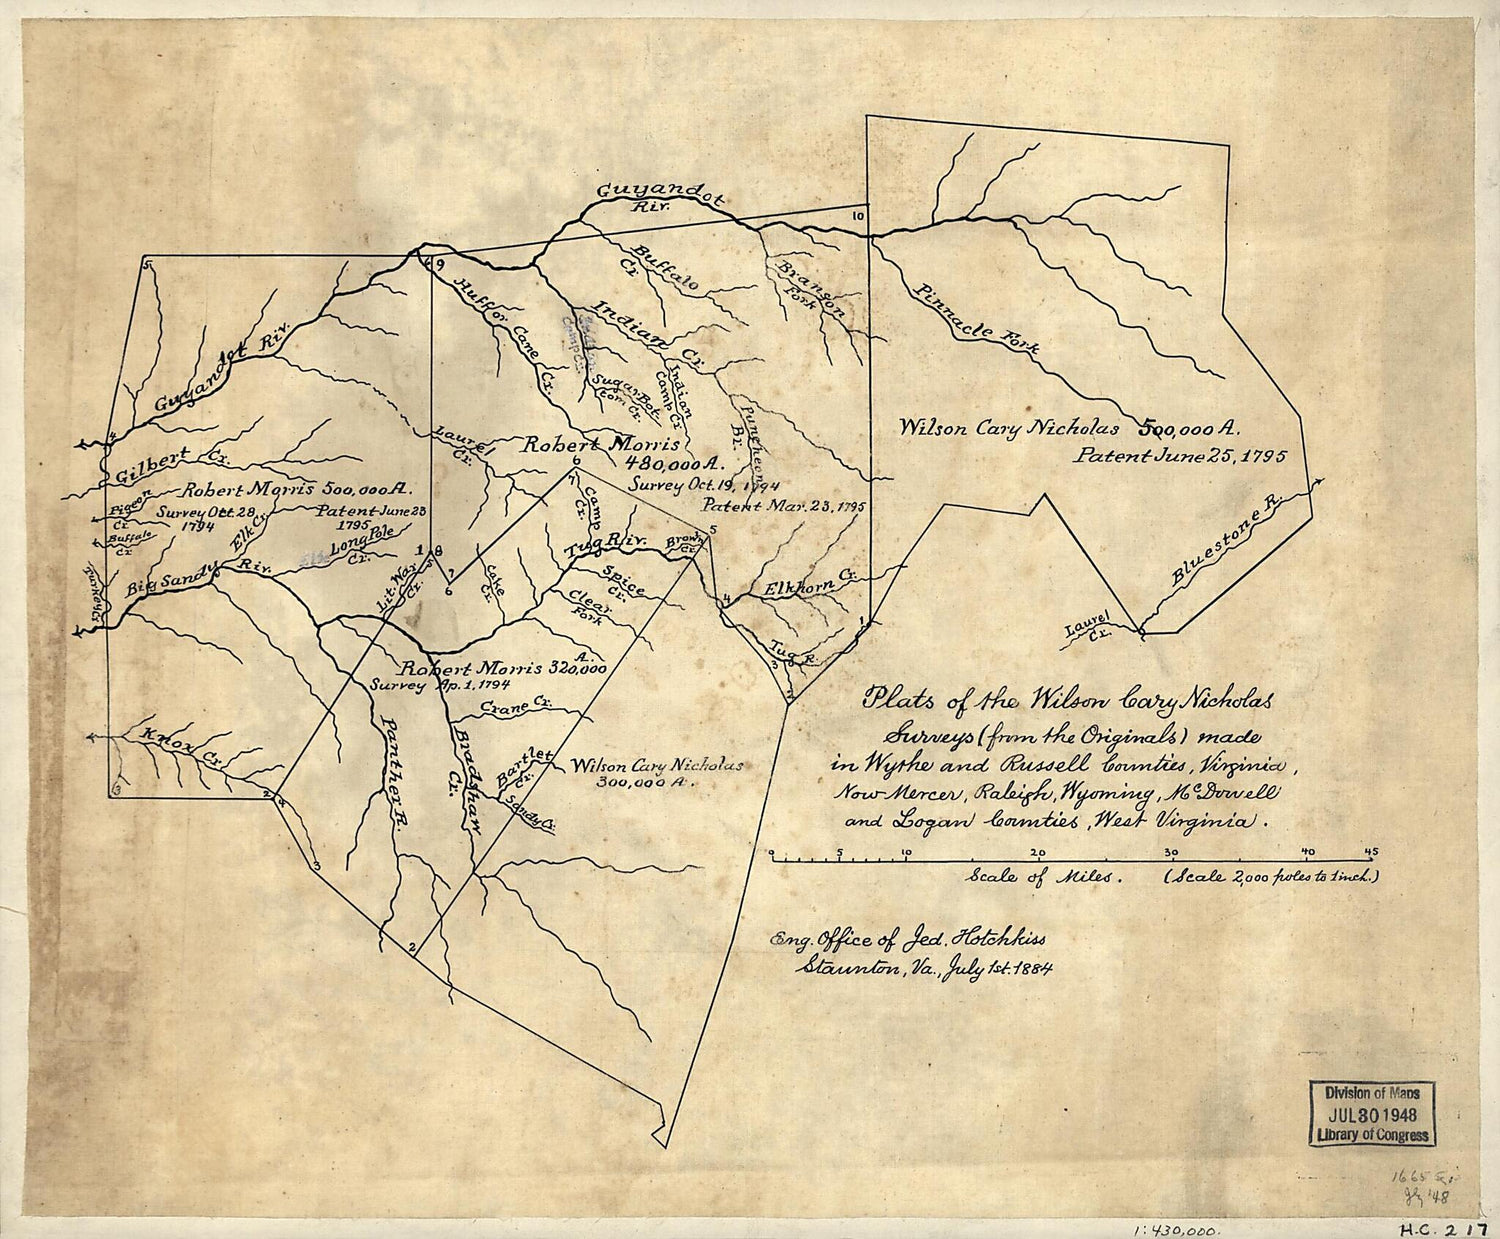 This old map of Plats of the Wilson Cary Nicholas Surveys (from the Originals) Made In Wythe and Russell Counties, Virginia, Now Mercer, Raleigh, Wyoming, McDowell, and Logan Counties, West Virginia from 1795 was created by Jedediah Hotchkiss in 1795